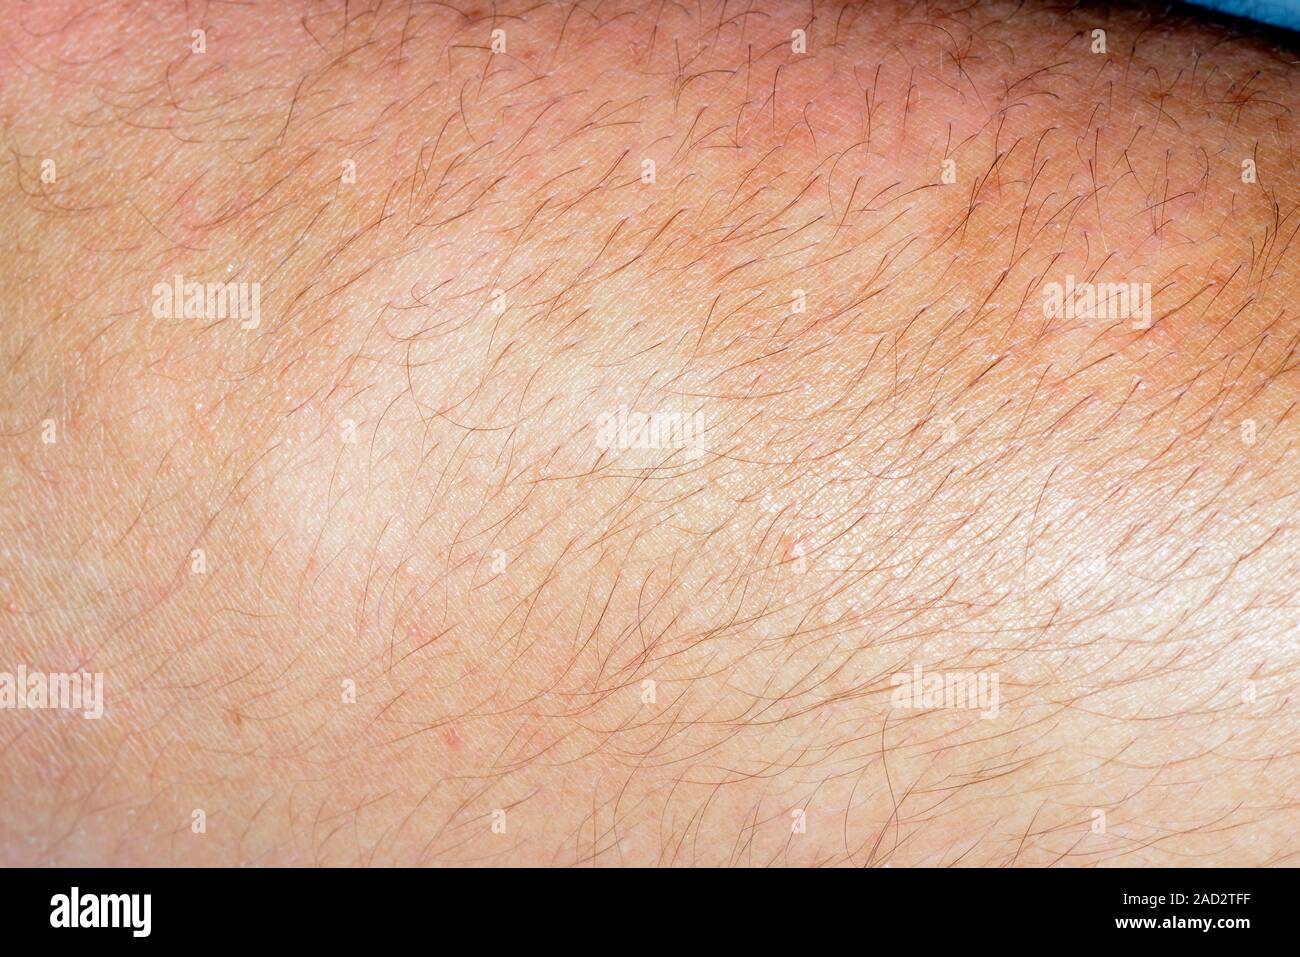 Pityriasis versicolor. Close-up of patches on the skin of a 19-year-old female patient with pityriasis versicolor. Also known as tinea versicolor, thi Stock Photo